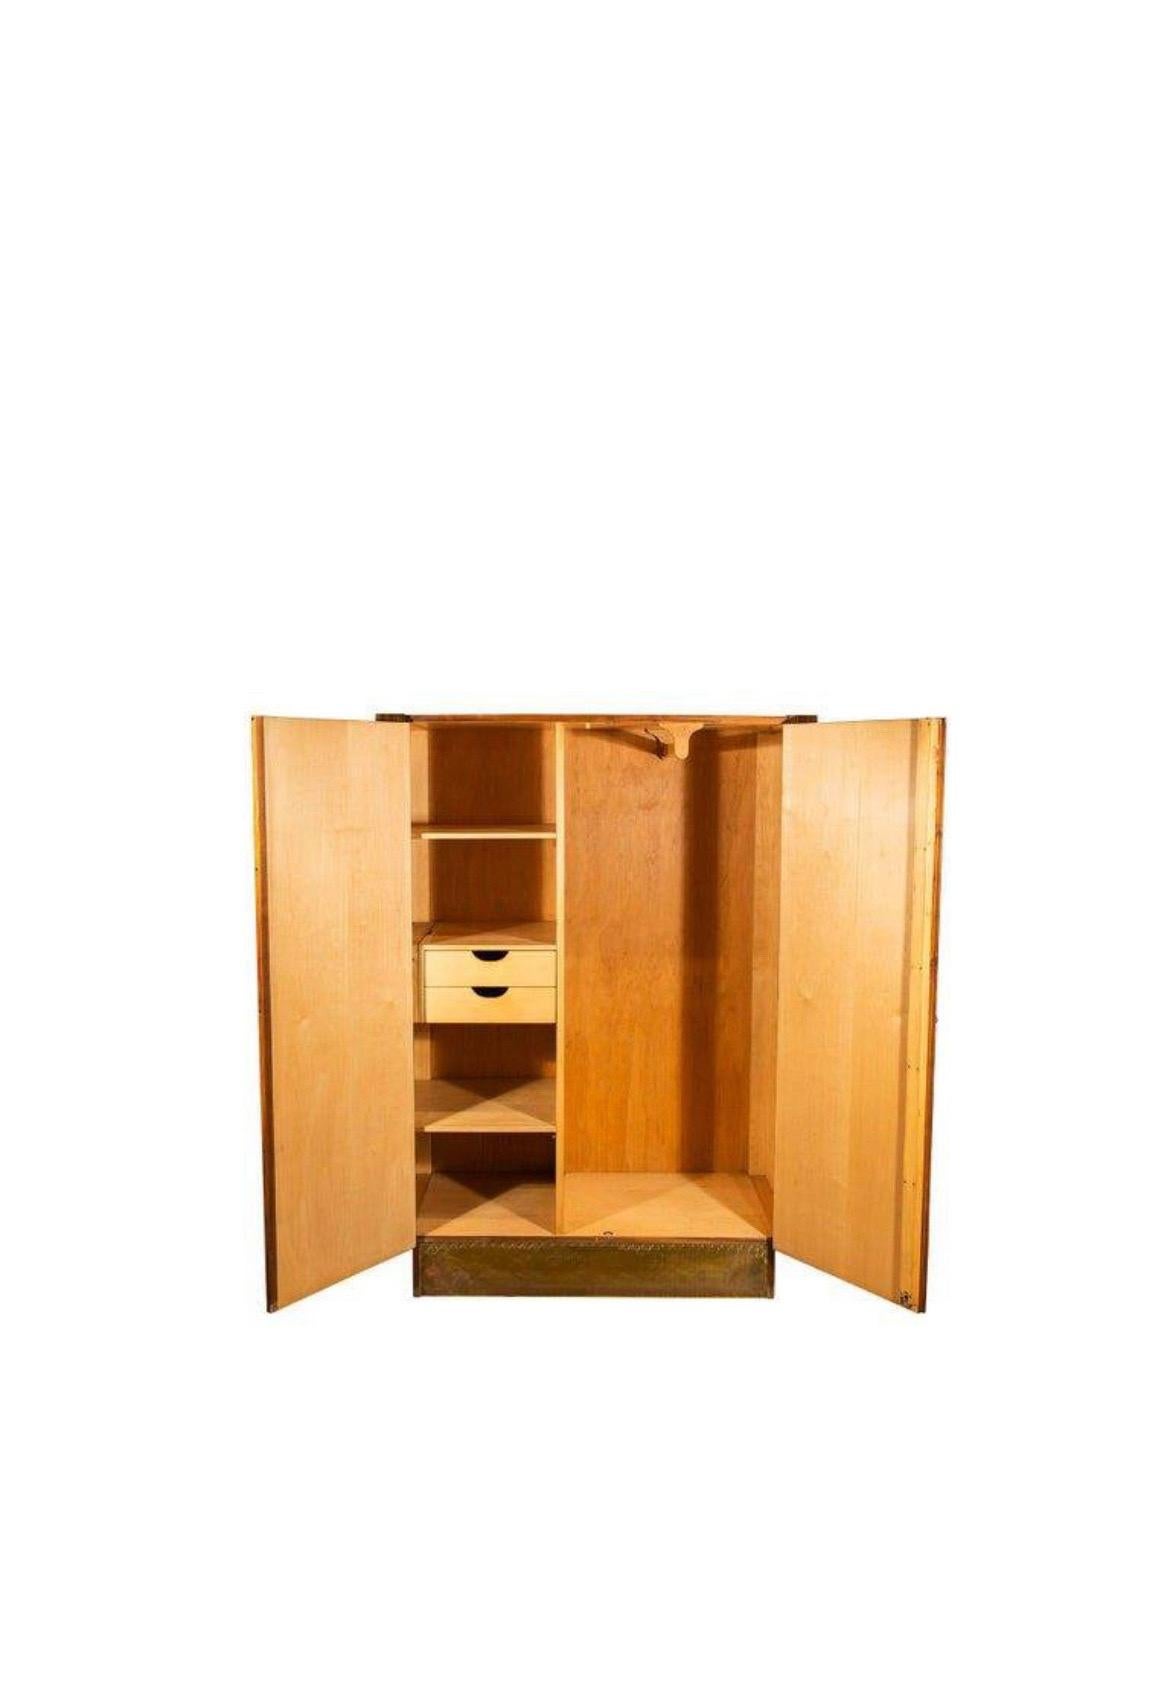 A stunning small Cabinet - Wardrobe in polished teak wood, With rounded Brass details. The piece is beautifully made, and has a distinkt Art Deco reference. The cabinet has two compartments, one with drawers and shelves and one with hangers.

The